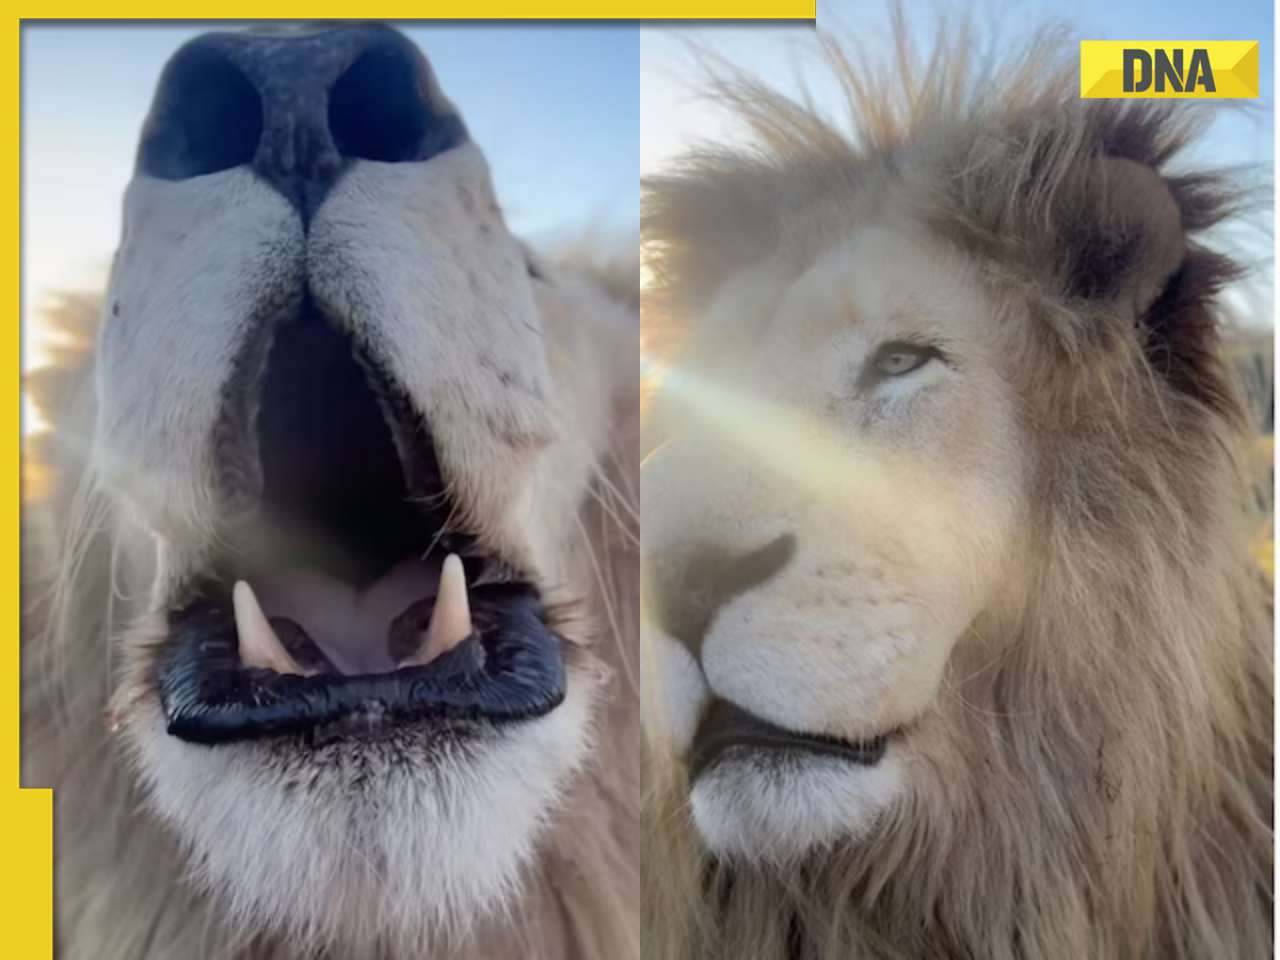 Viral video: Majestic lion welcomes US photographer with a roaring greeting, watch